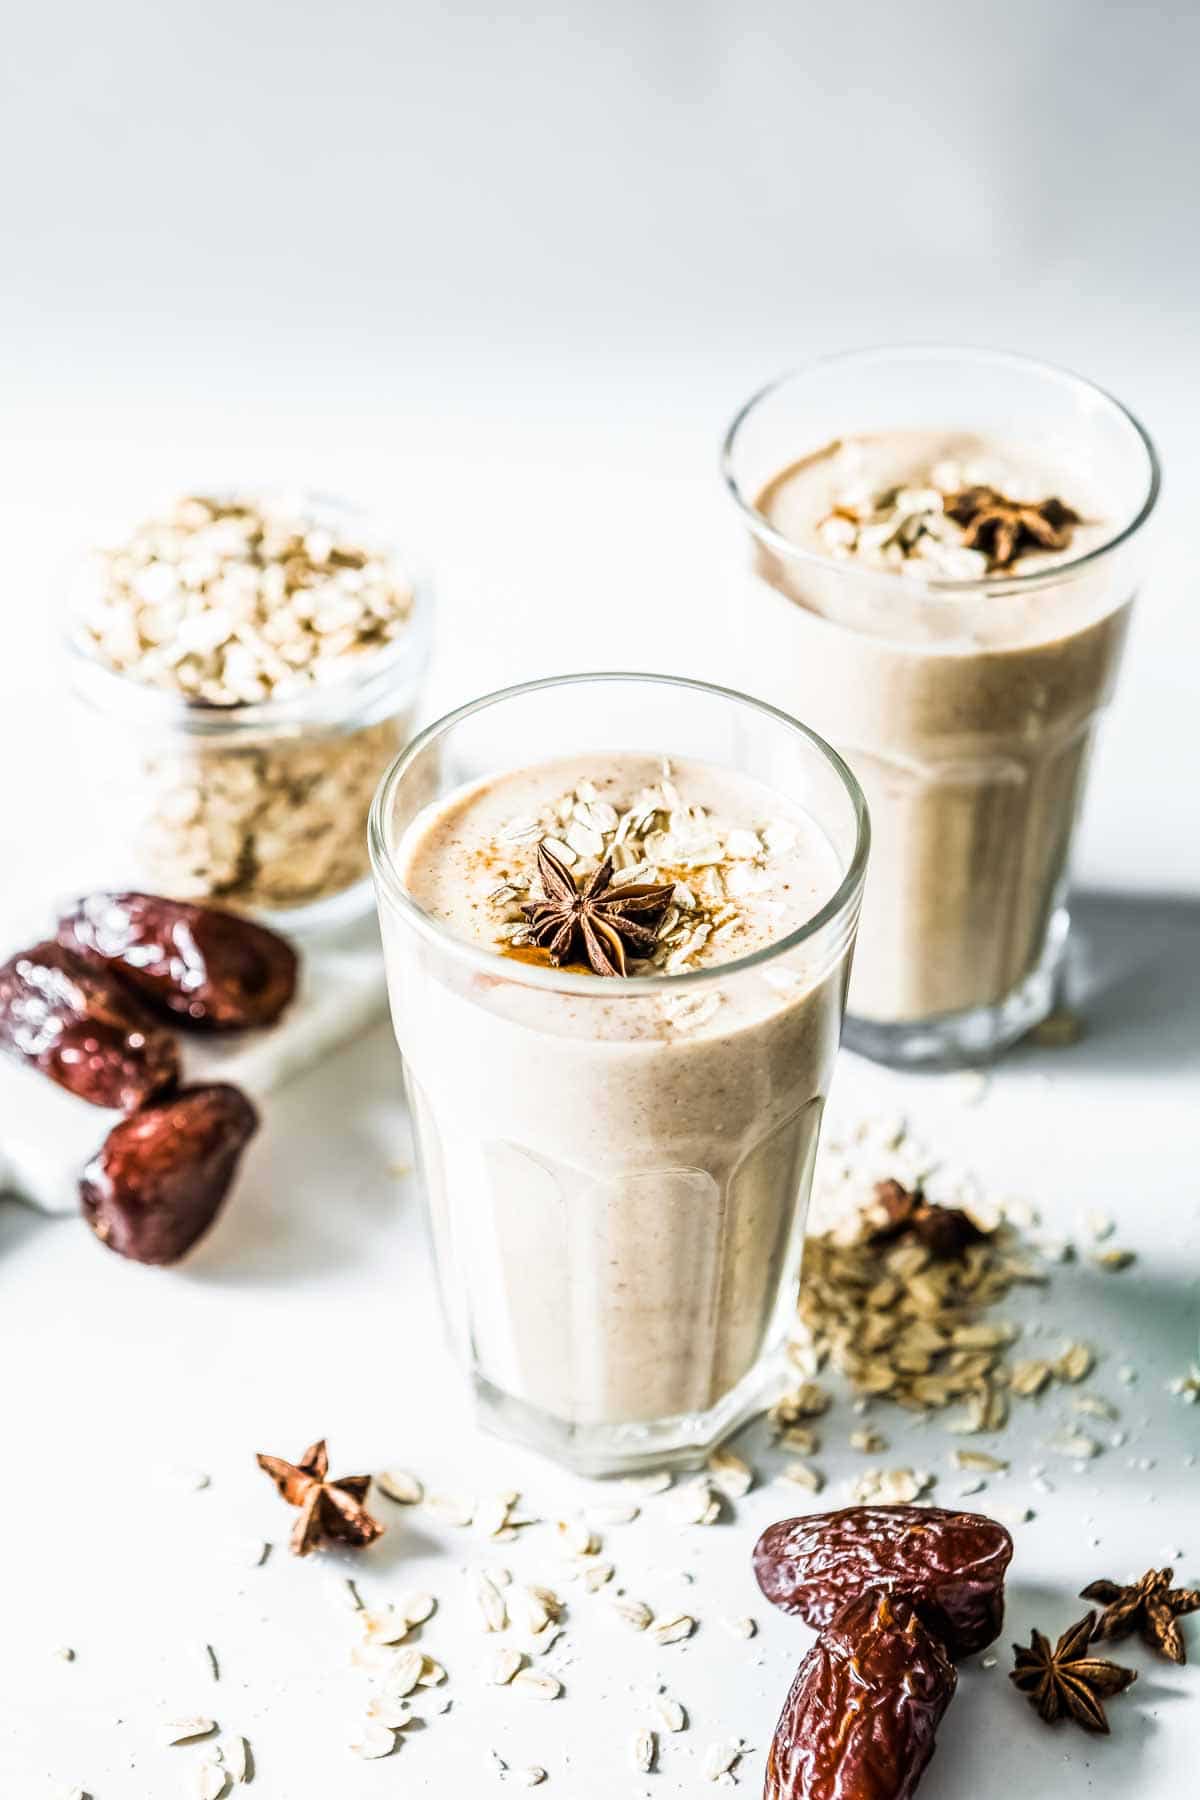 Natural Delights dates are used in this smoothie